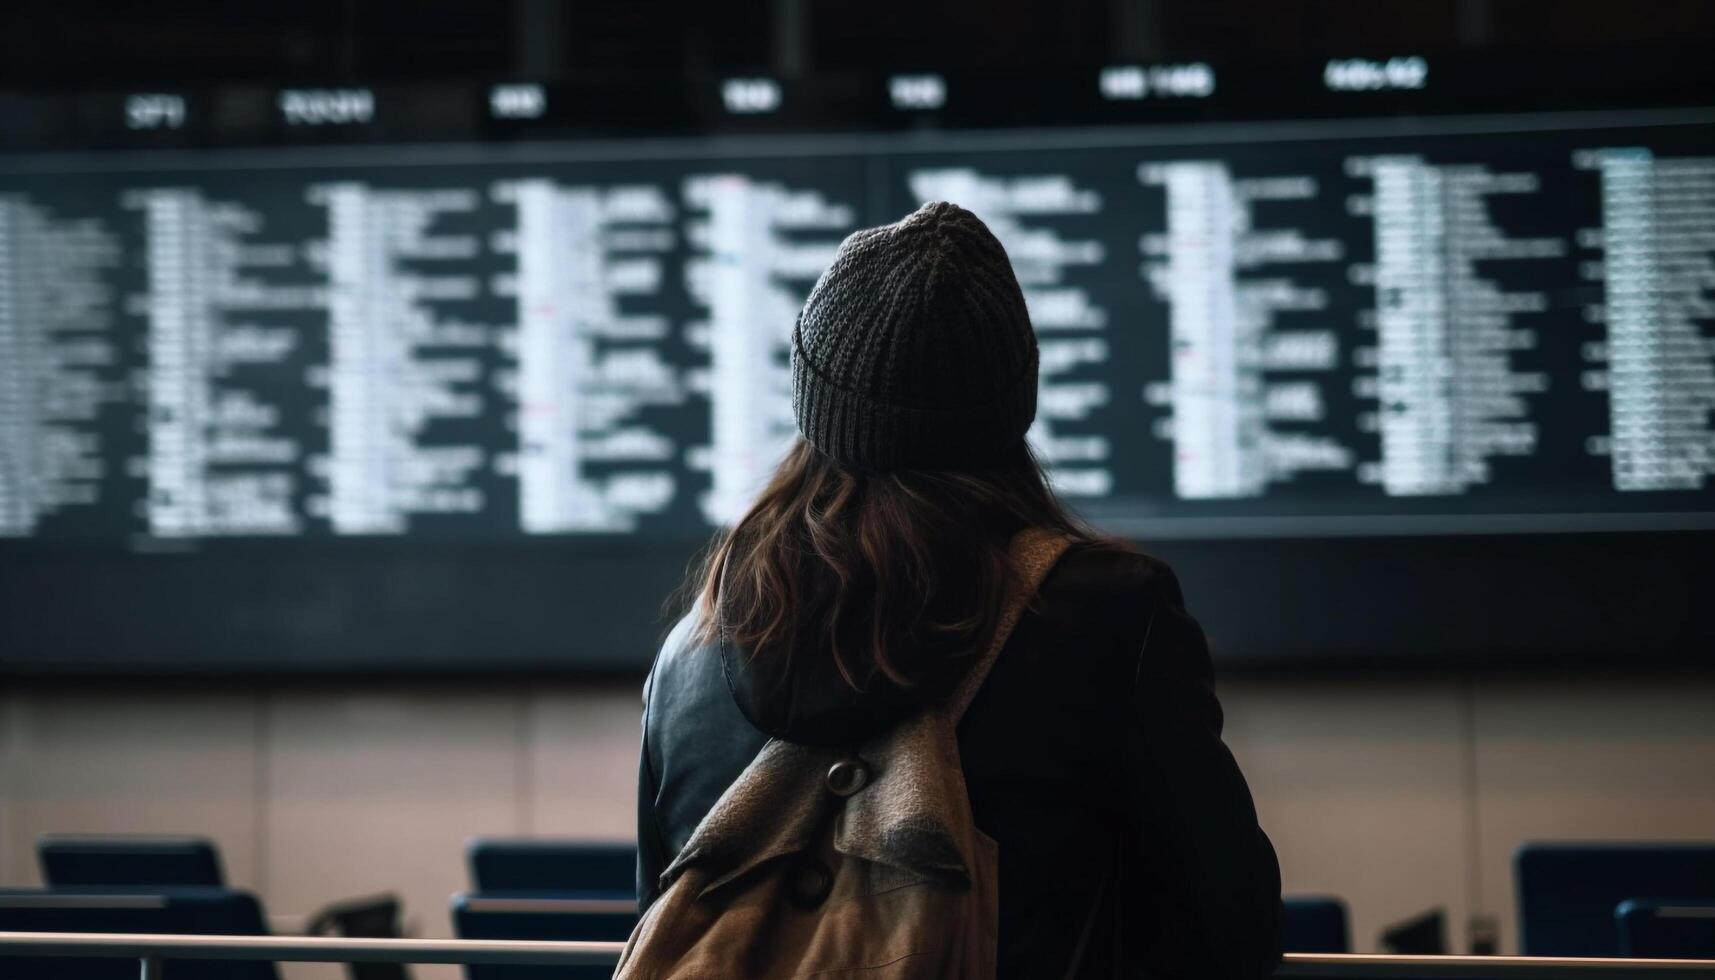 Young woman waiting, luggage in tow, for boarding adventure generated by AI photo